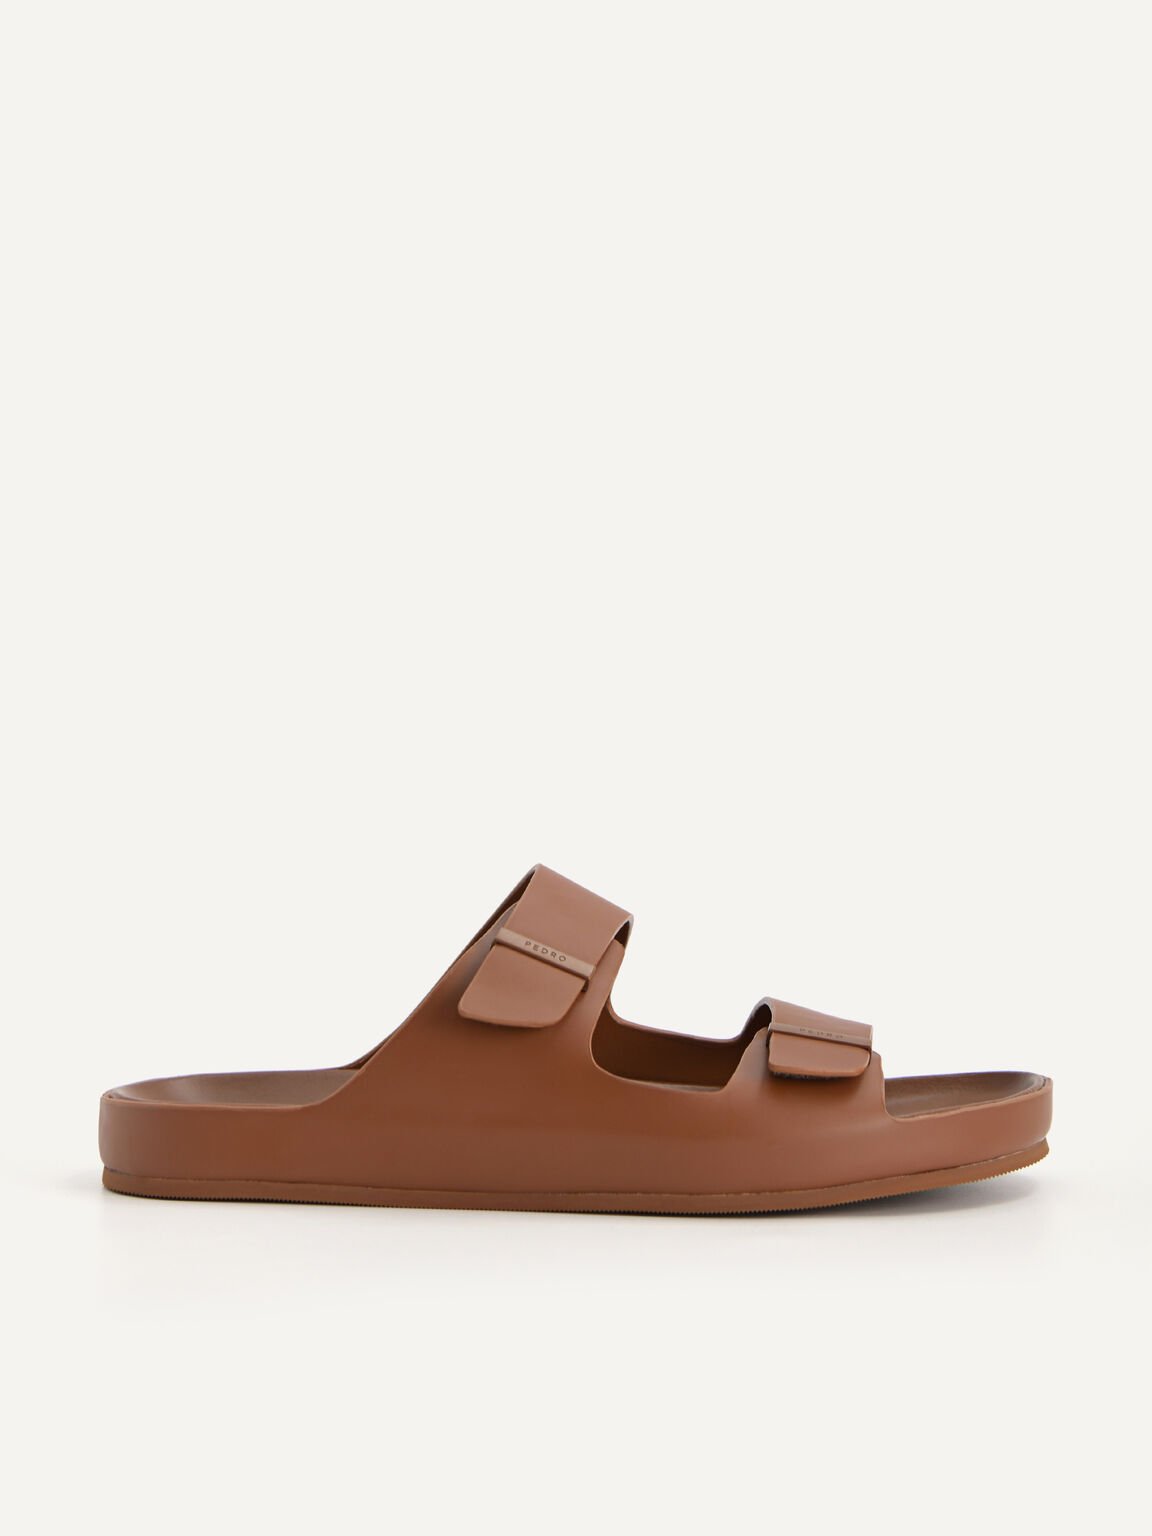 Double Strap Sandals, Brown